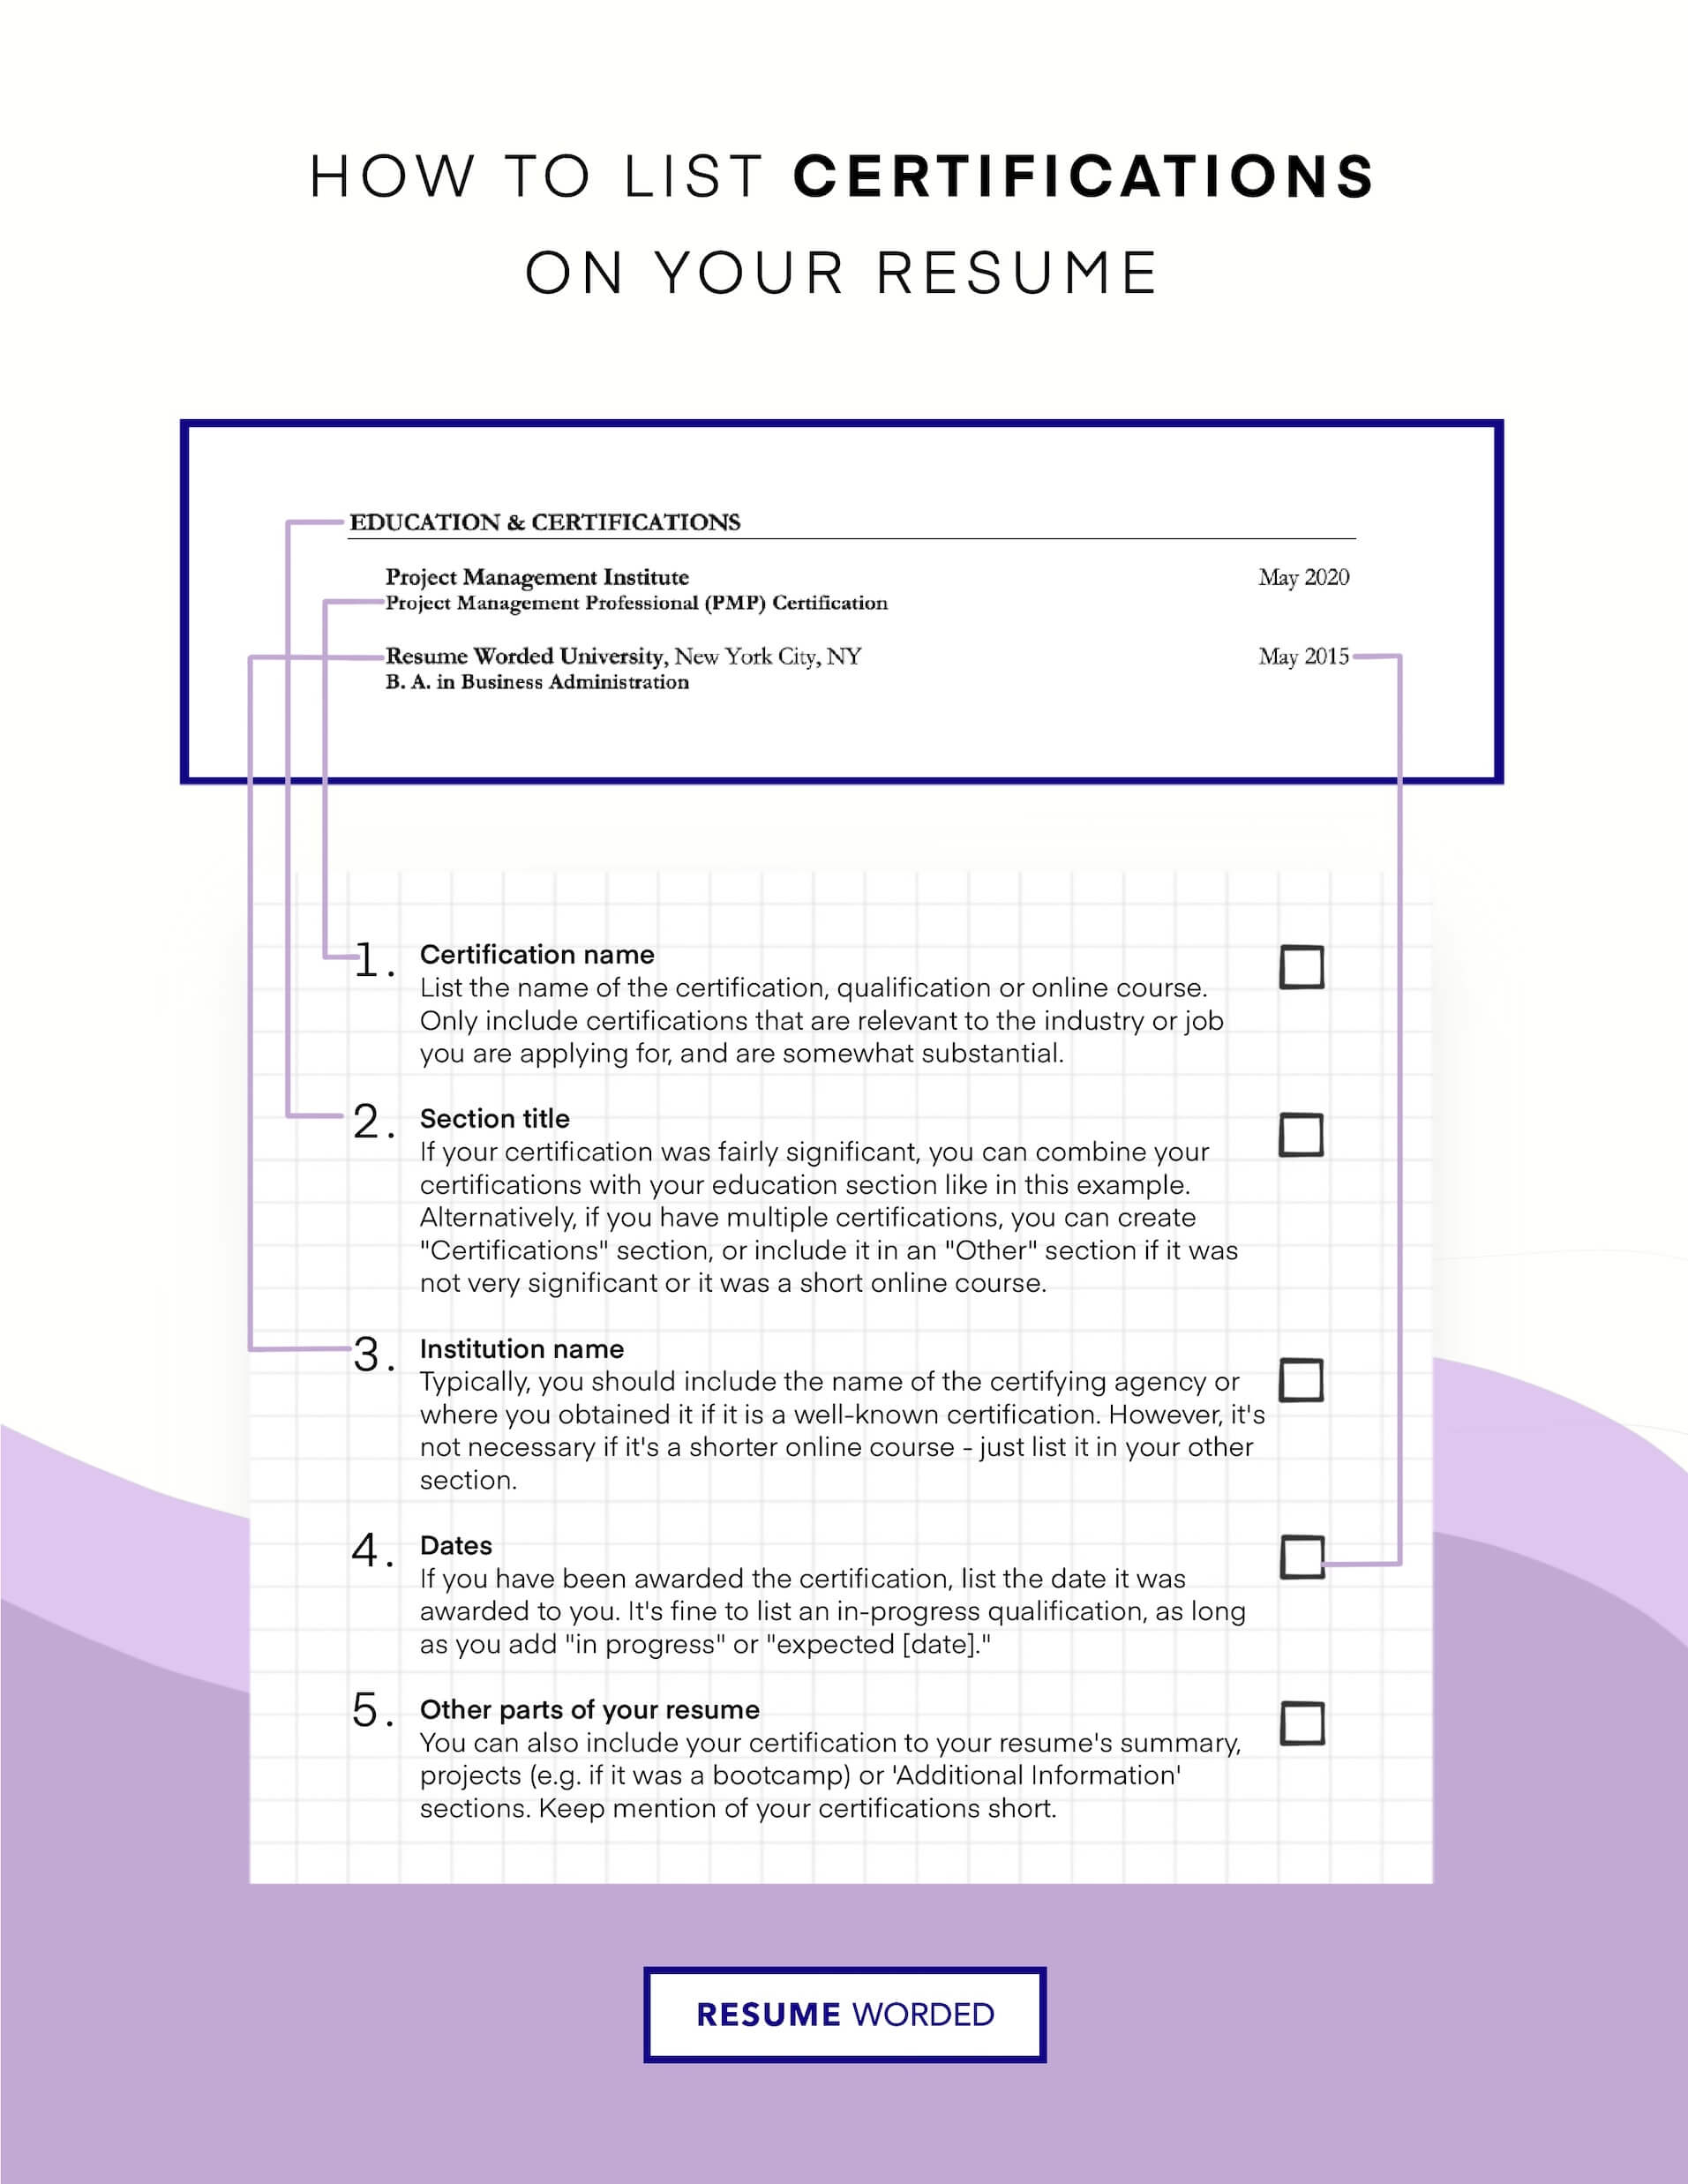 Work on getting customer service certification. - Customer Service Specialist Resume